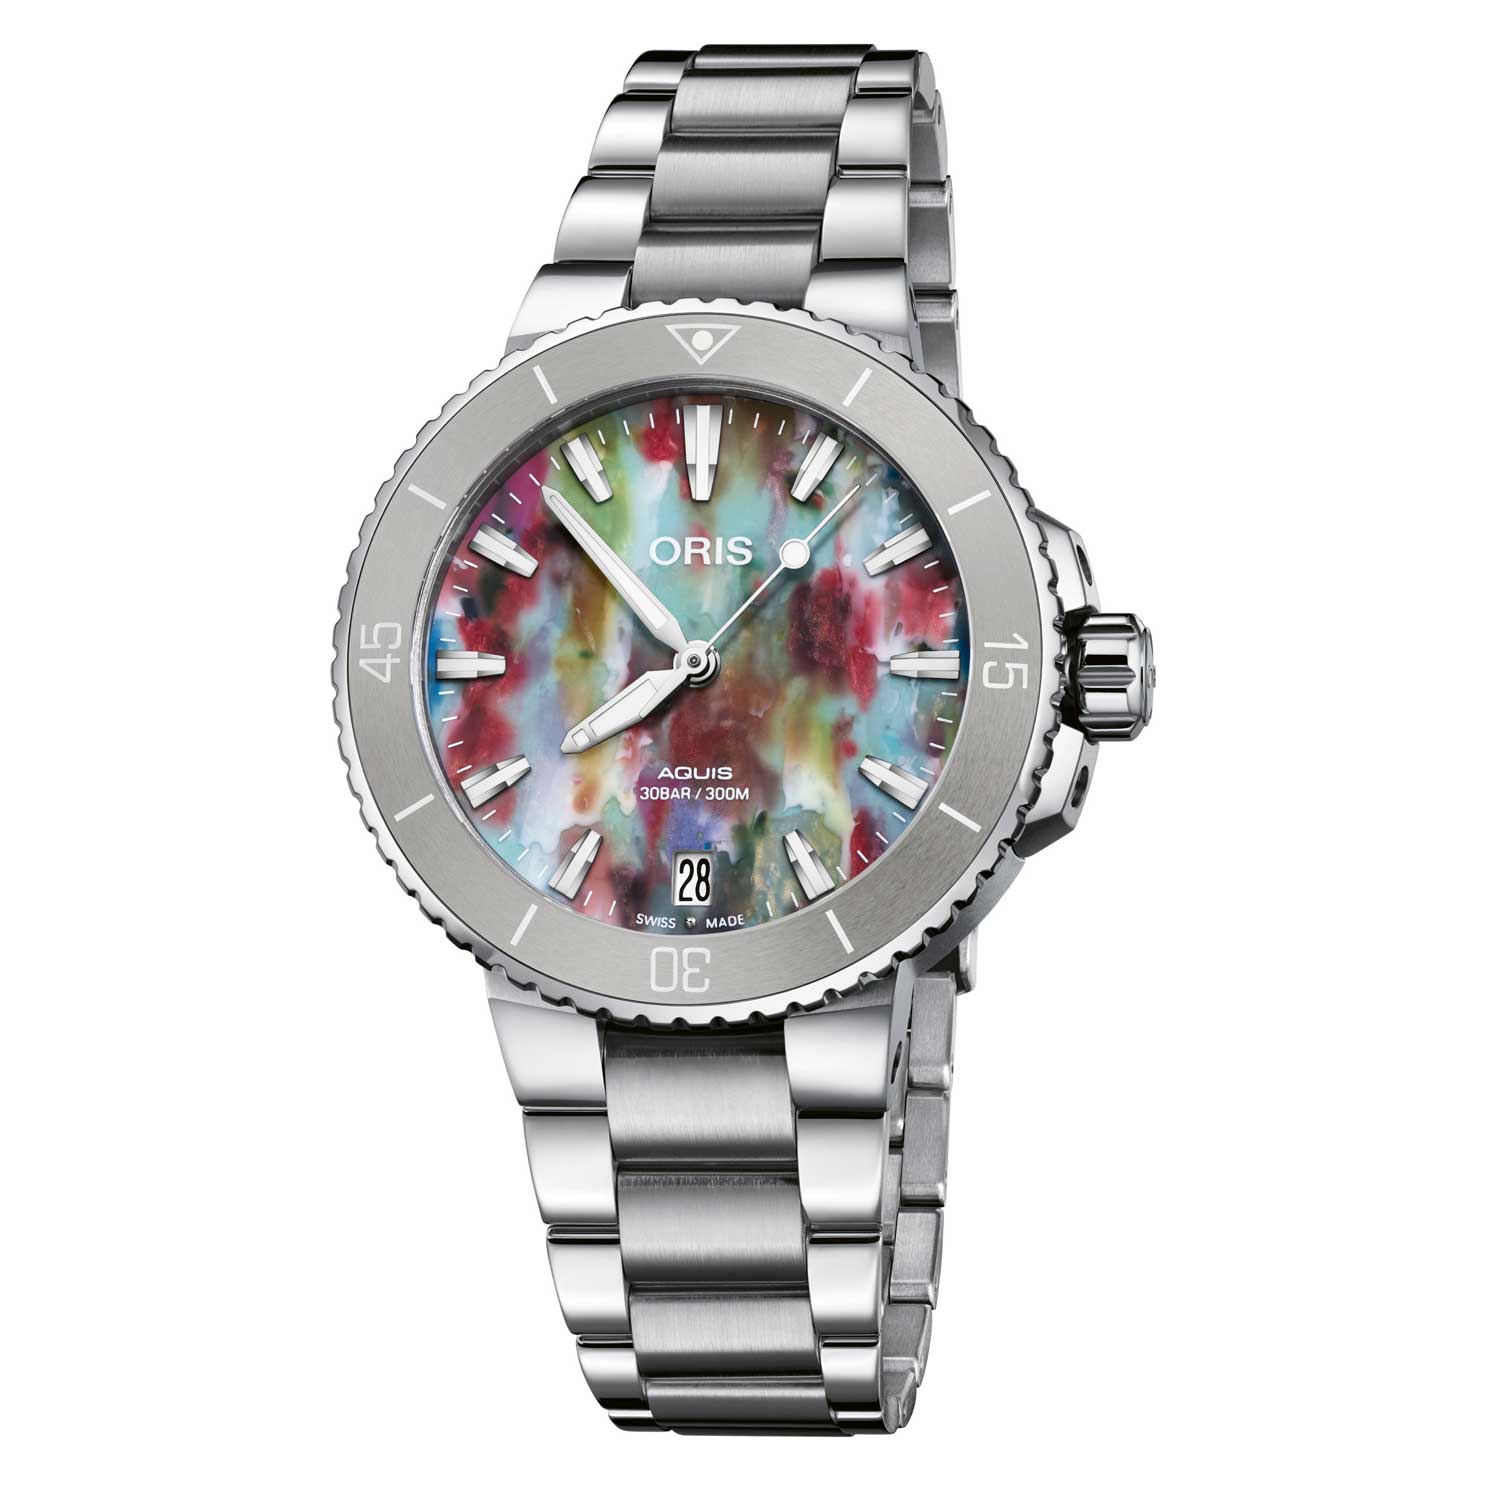 The speckled, multi-coloured dial of this Aquis is made from upcycled plastic materials